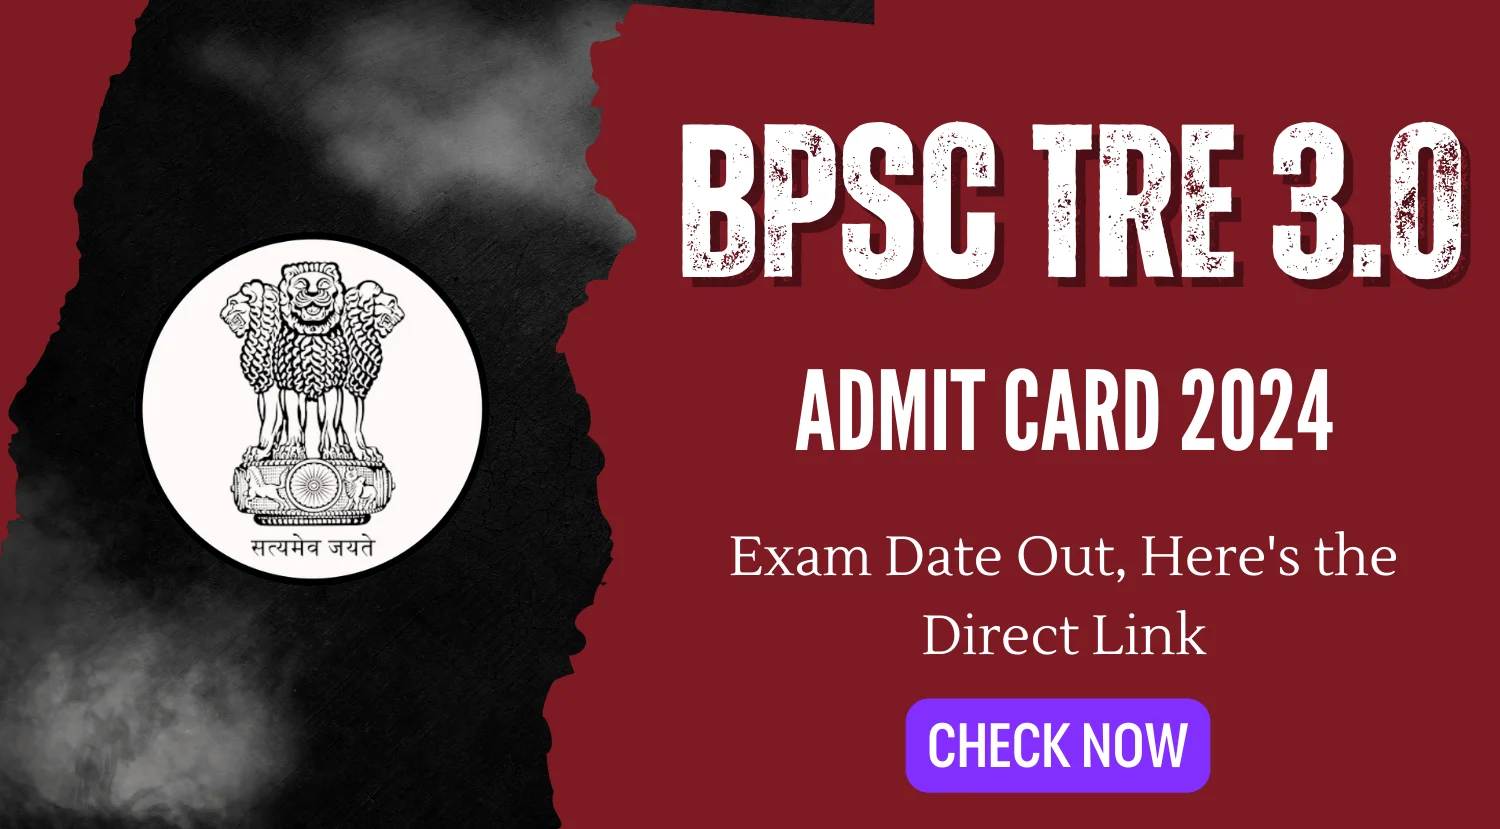 BPSC TRE 30 Admit Card 2024 Exam Date Out Heres the Direct Link